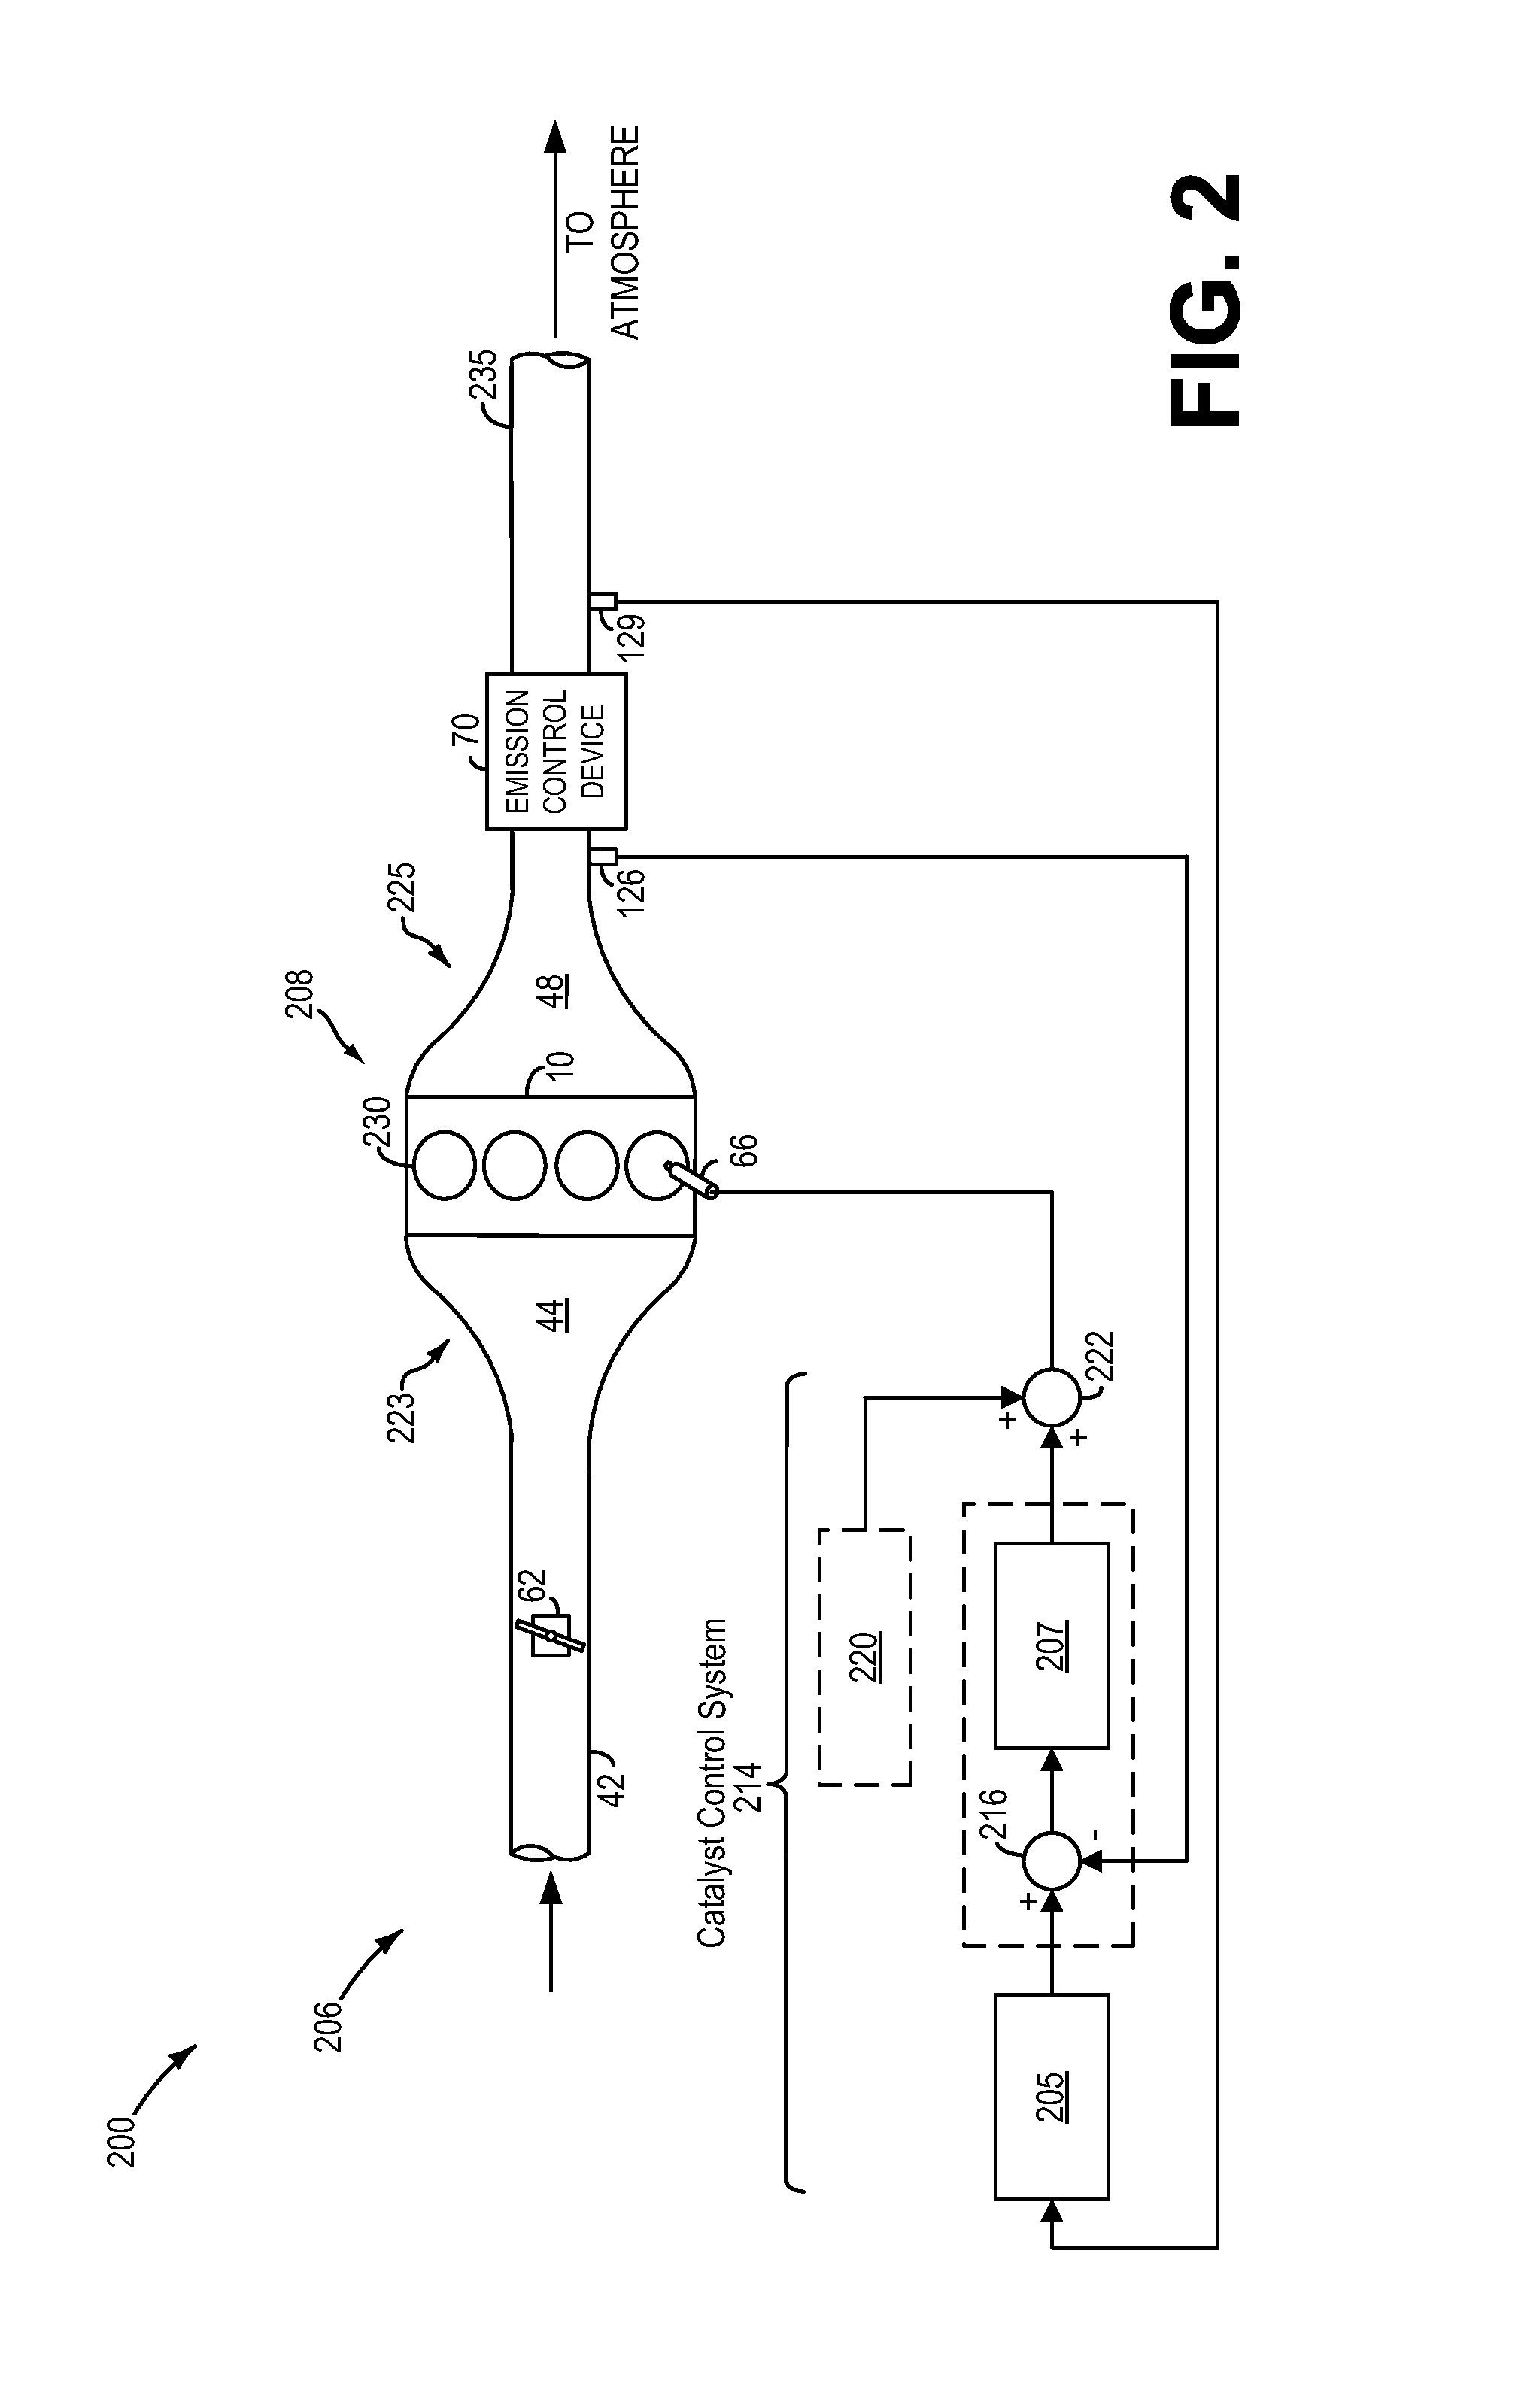 Method for identification of a threshold-level catalyst